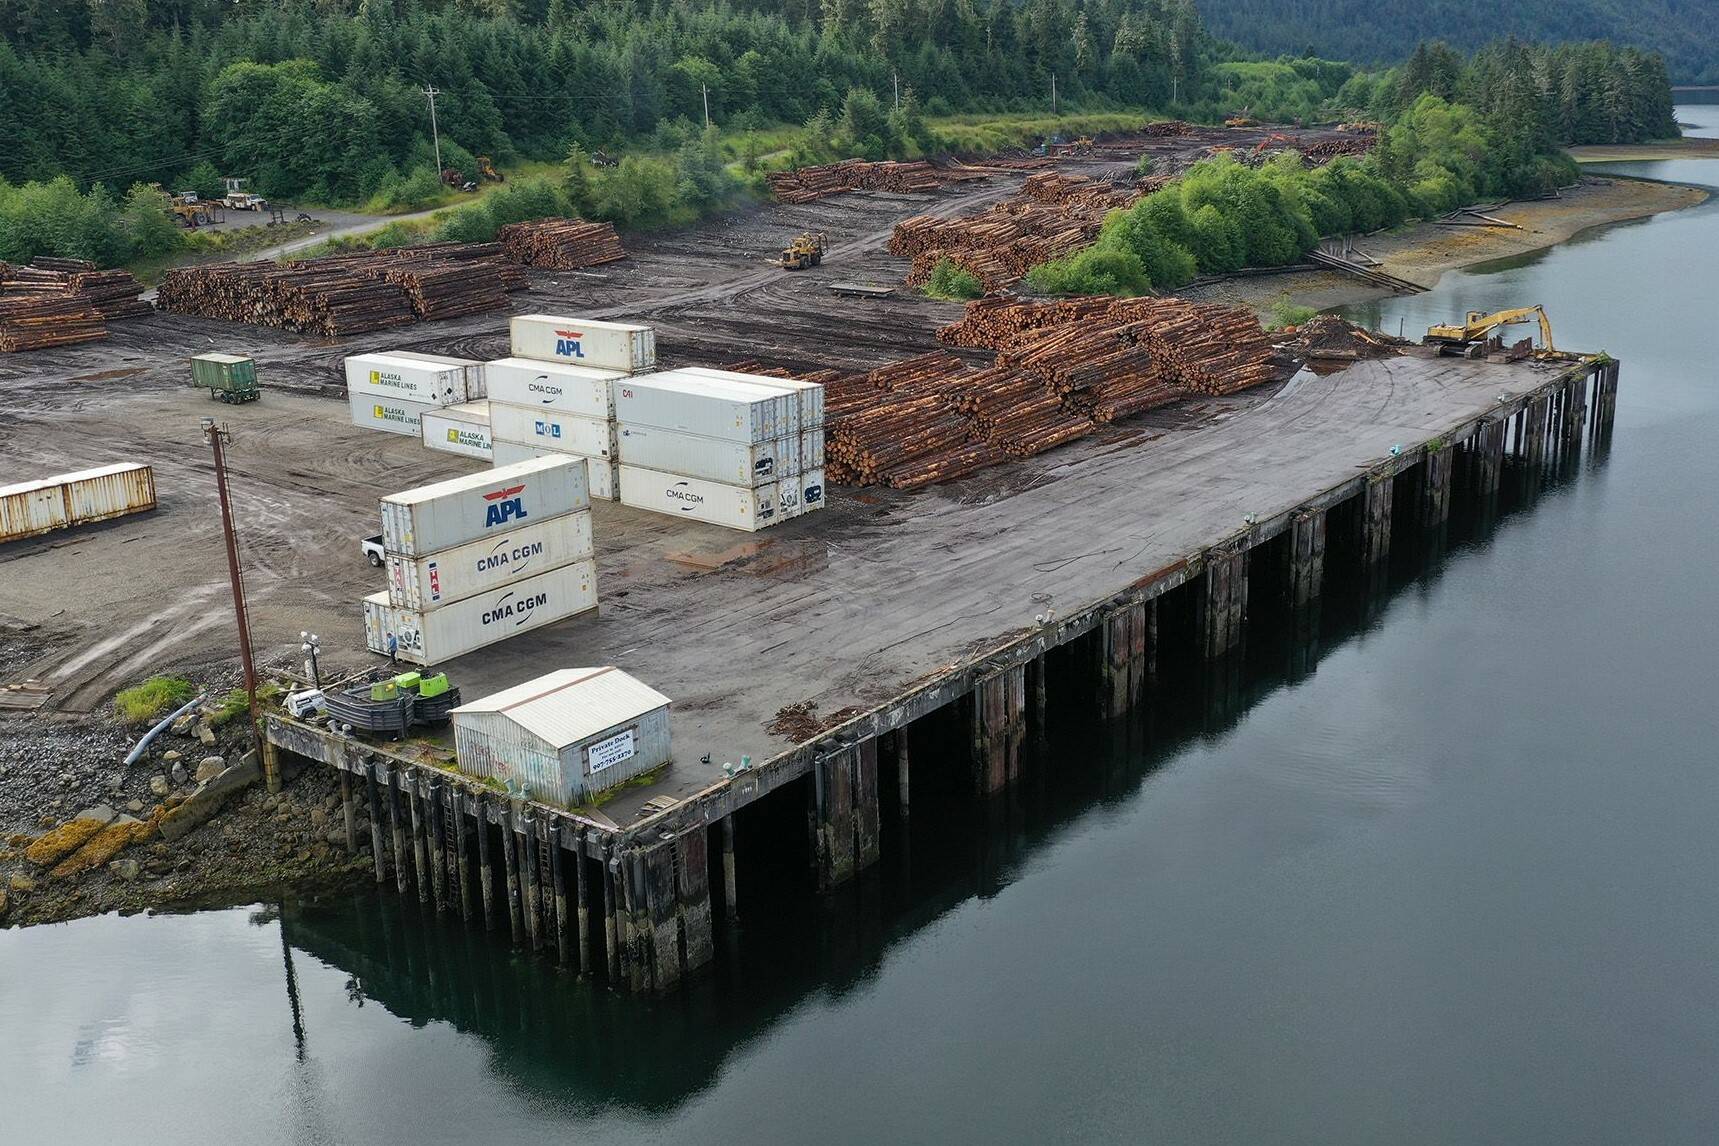 An old timber dock near the village of Klawock on Prince of Wales Island will soon be renovated to be able to receive cruise ship passengers as soon as next year after several Alaska Native corporations announced a joint-venture to develop the project. (Courtesy photo / Na-Dena` LLC)